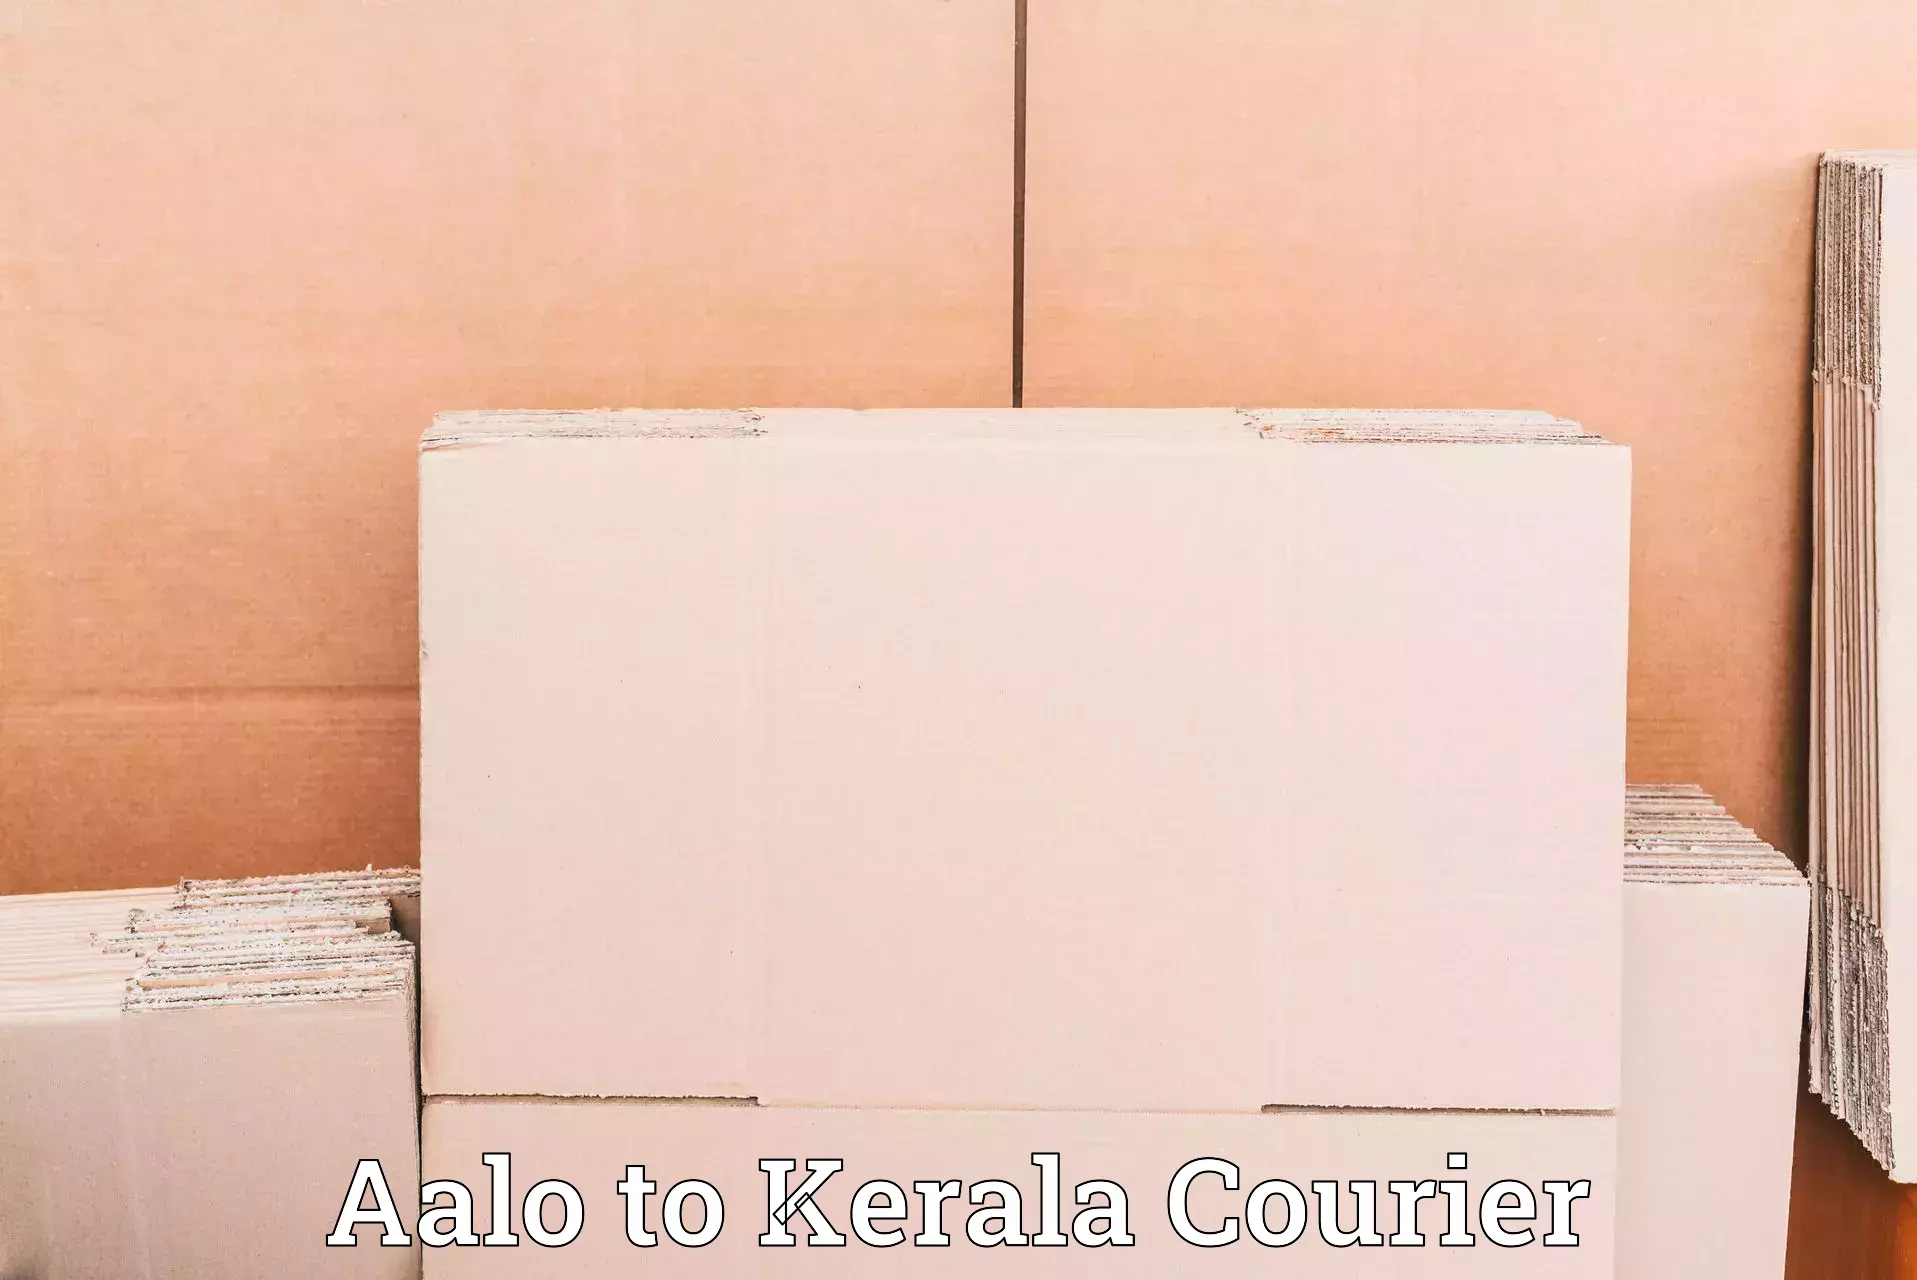 Nationwide delivery network Aalo to Kerala